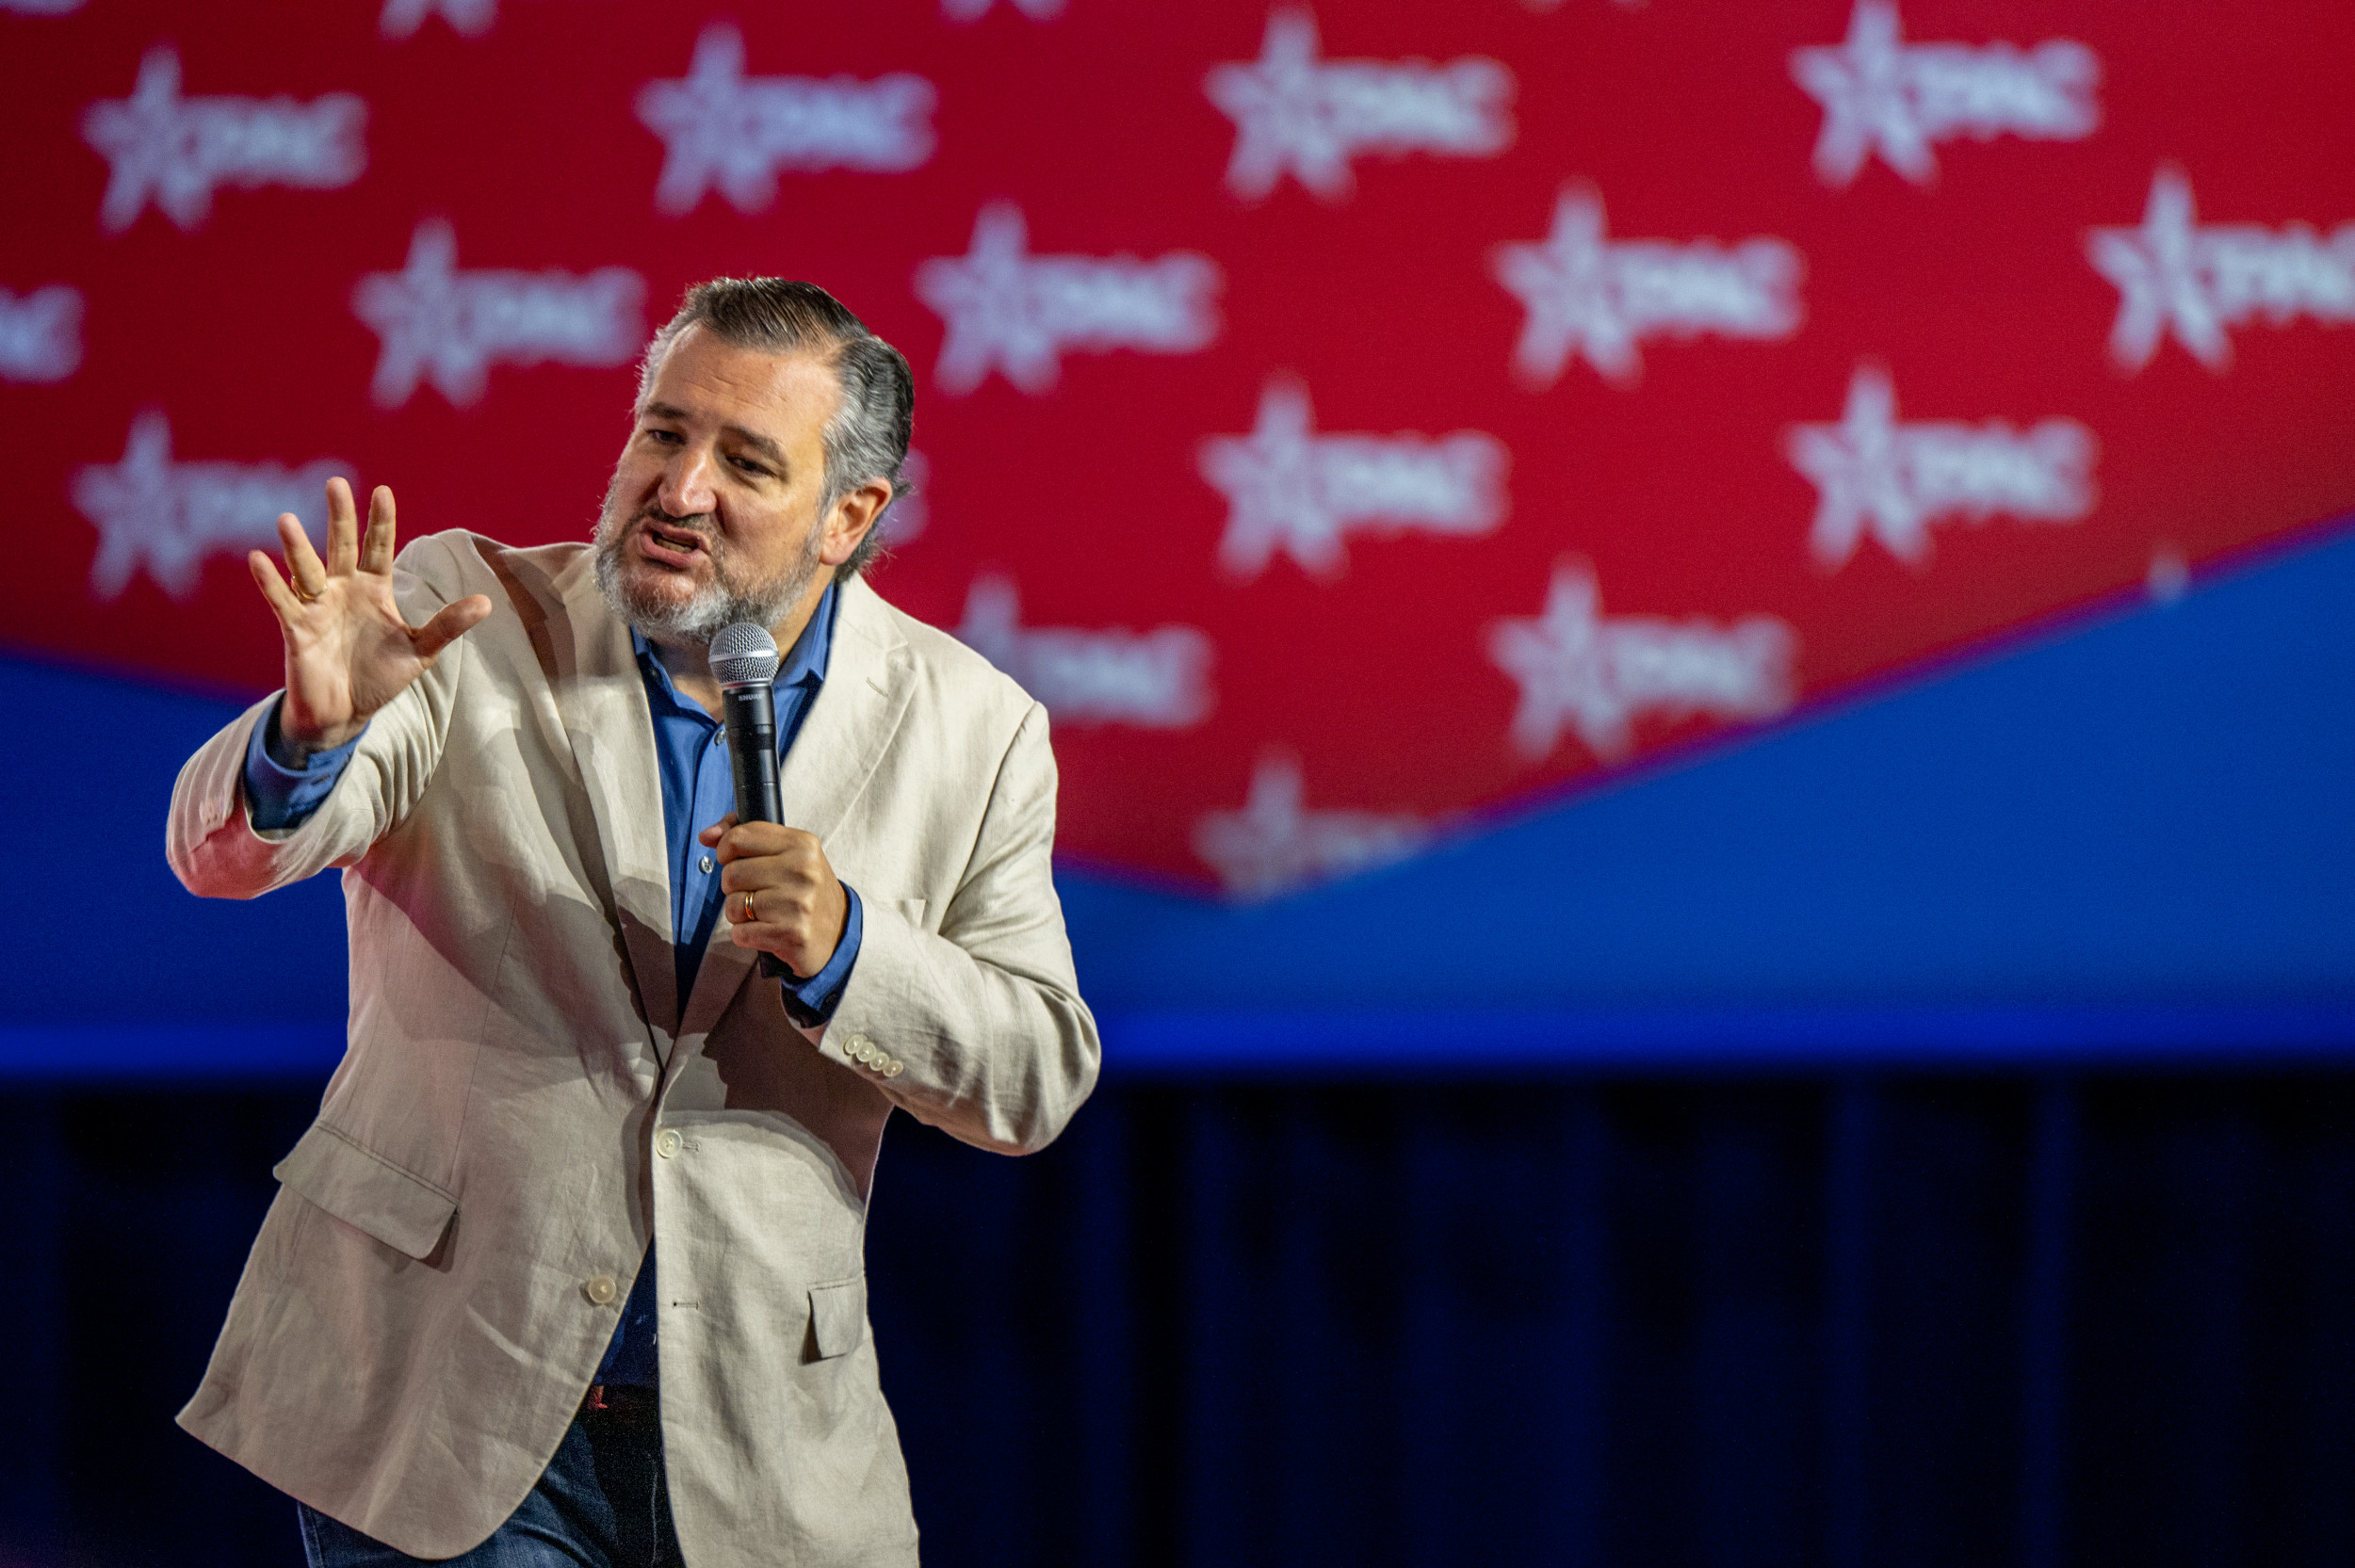 Ted Cruz agrees with critics who call CPAC attendees “dangerous radicals”